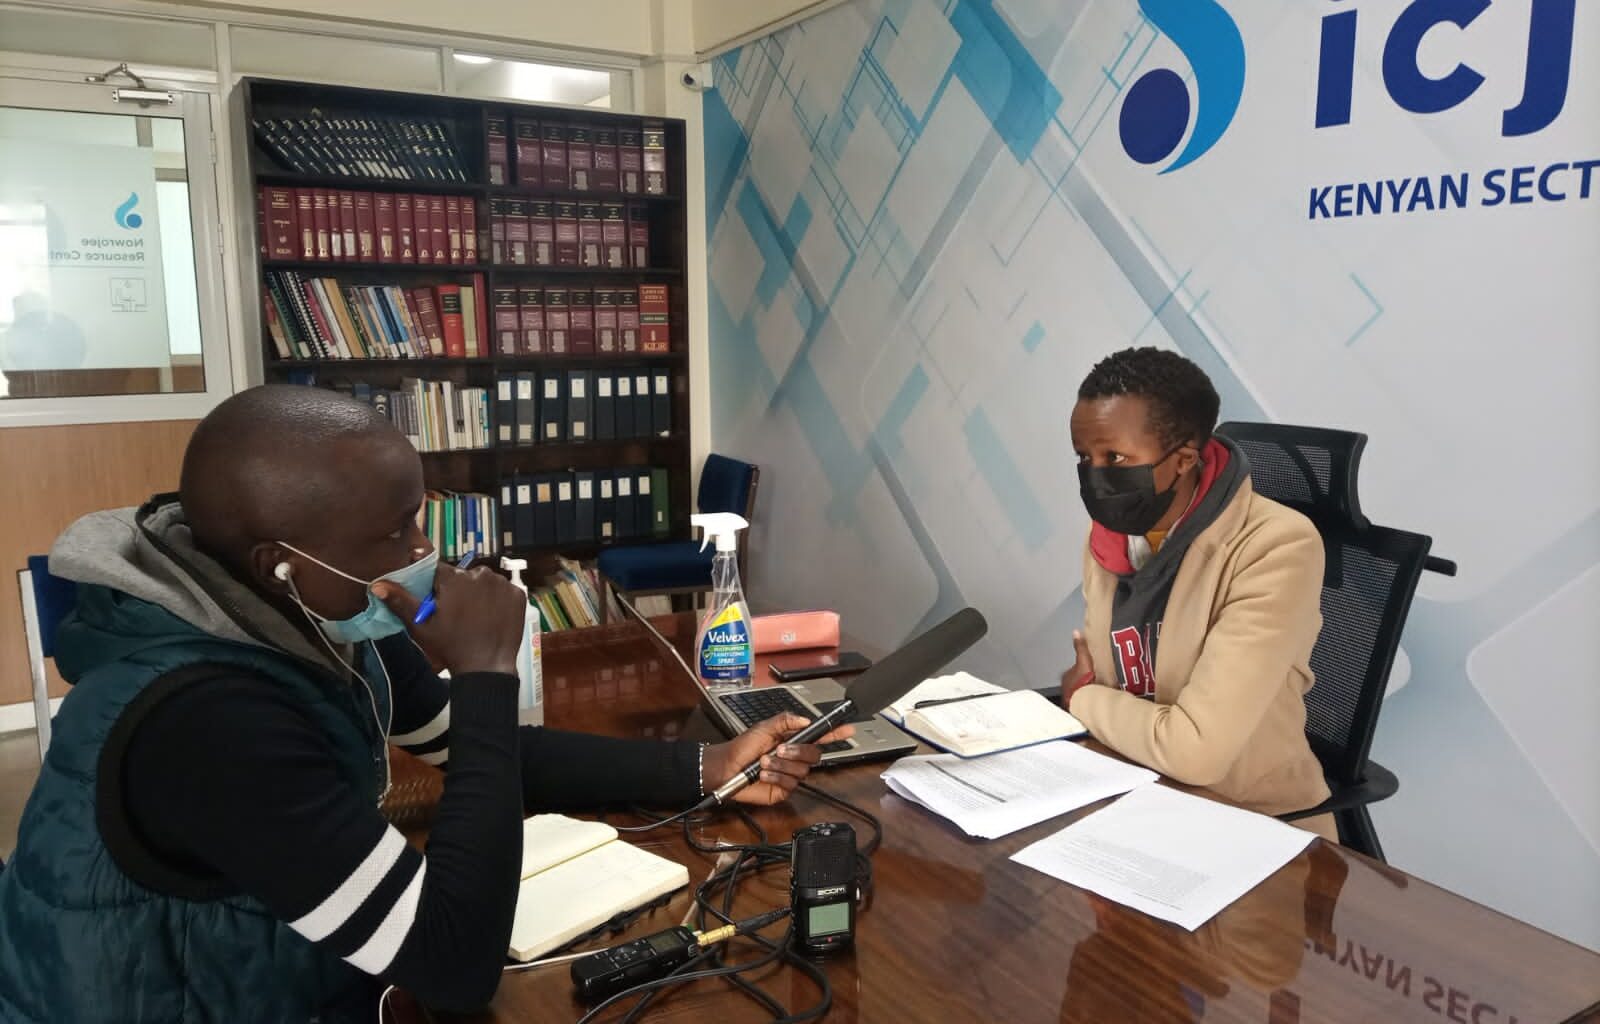 Our Programme Officer, Jane Muhia, and Journalist Henix Obuchunju discussing the importance of open contracting.